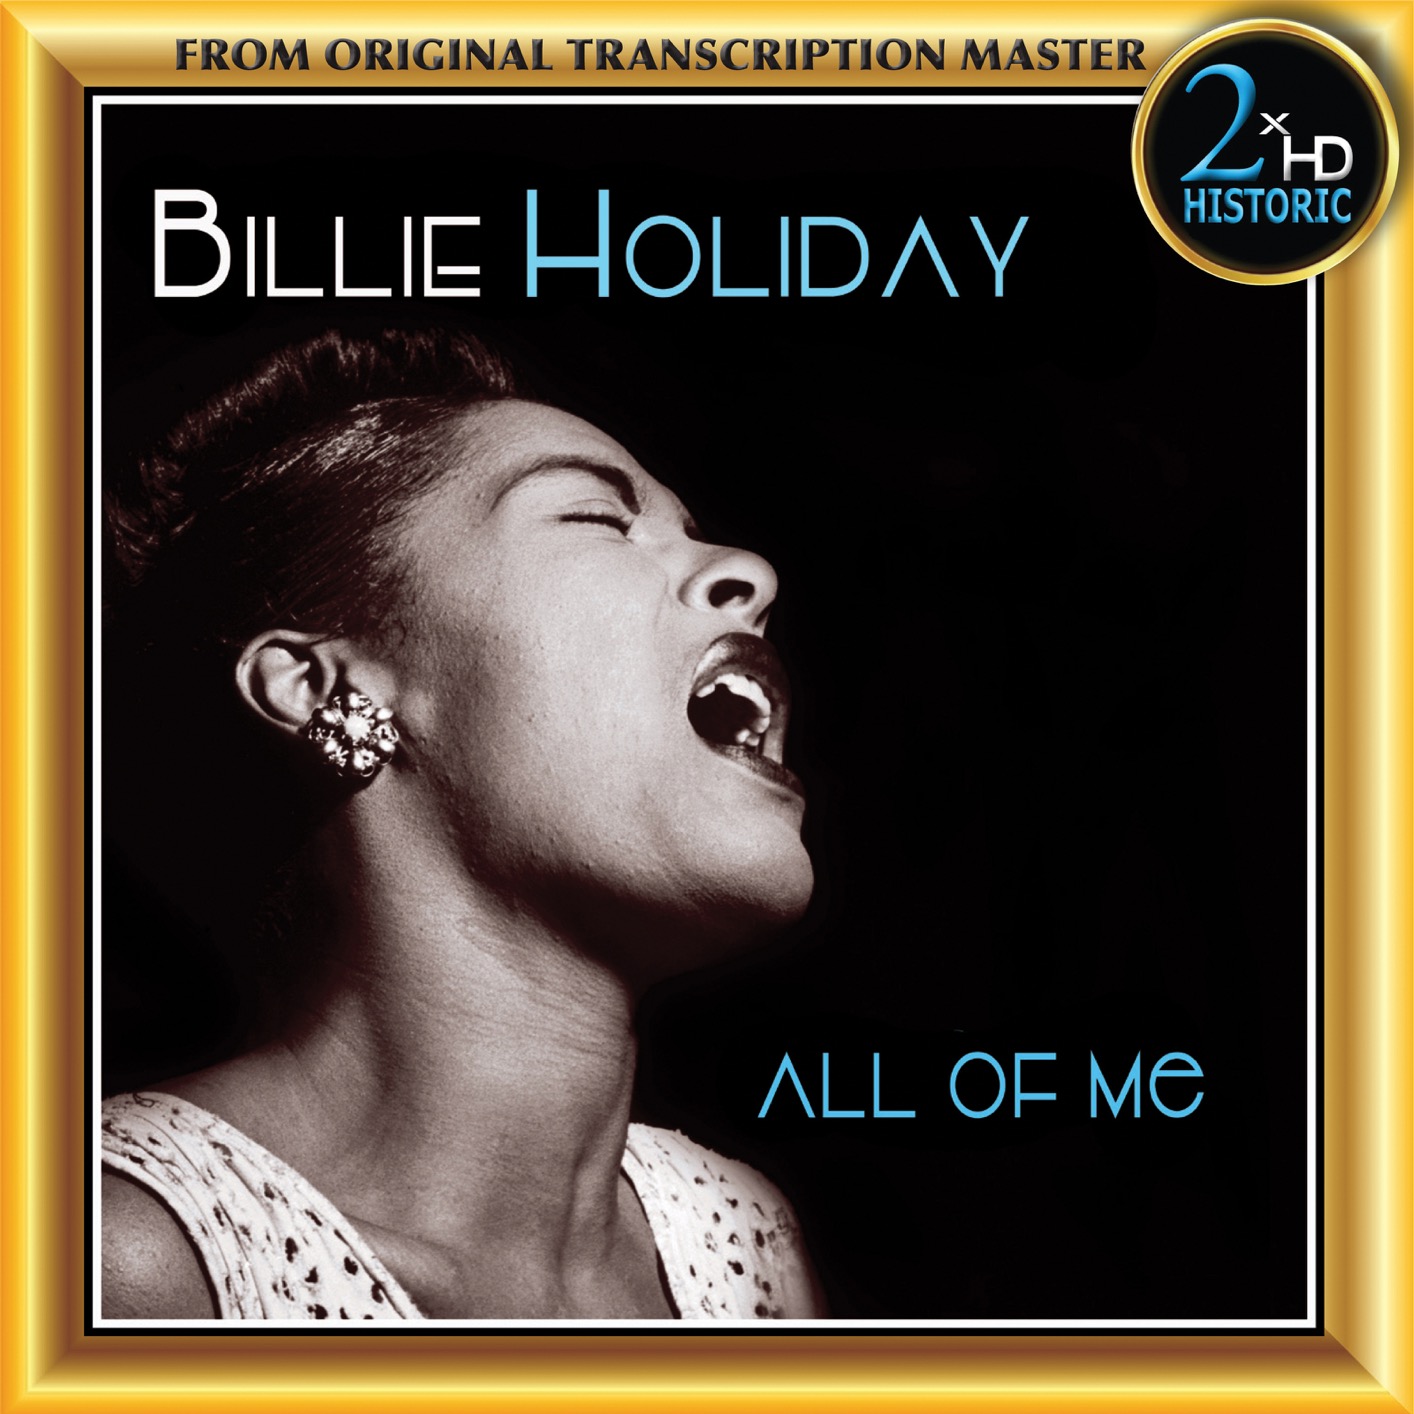 Billie Holiday – All of Me (Remastered) (2019) [FLAC 24bit/192kHz]